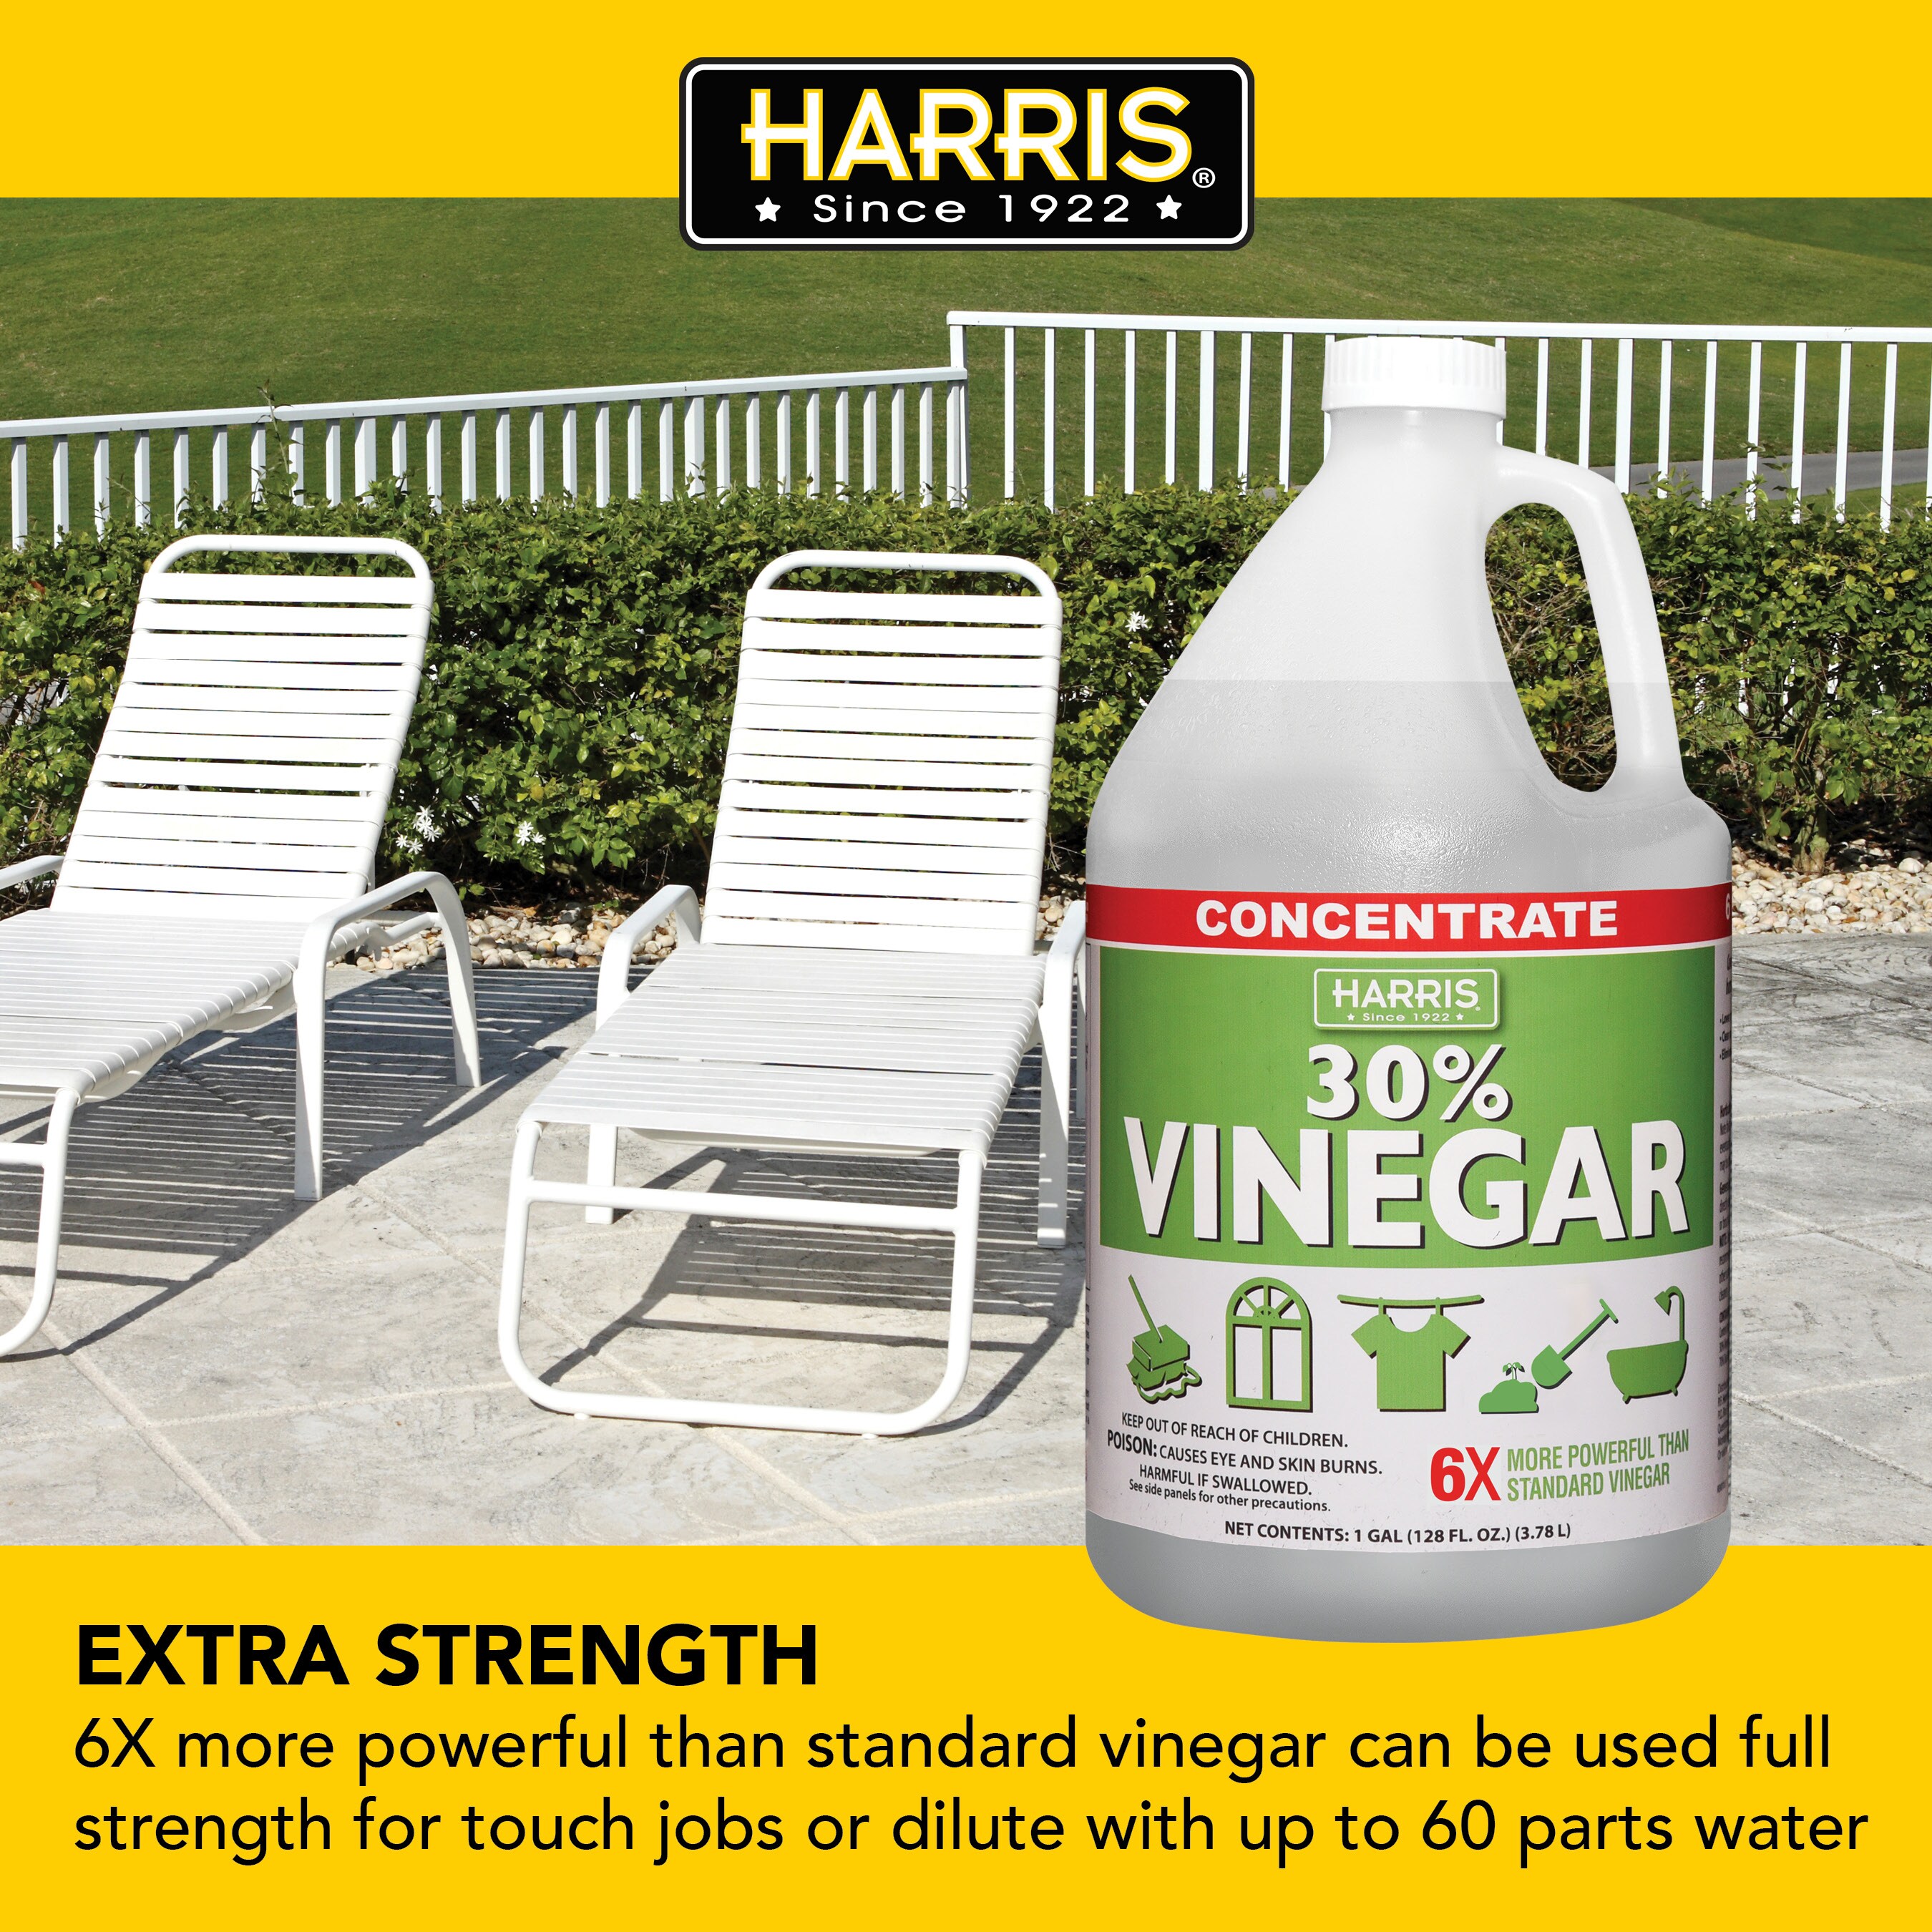 Wendy's All Purpose 30% Vinegar Extra Strength - Concentrated Industrial  Vinegar for Home and Garden Deep Cleaning (1 Gallon)